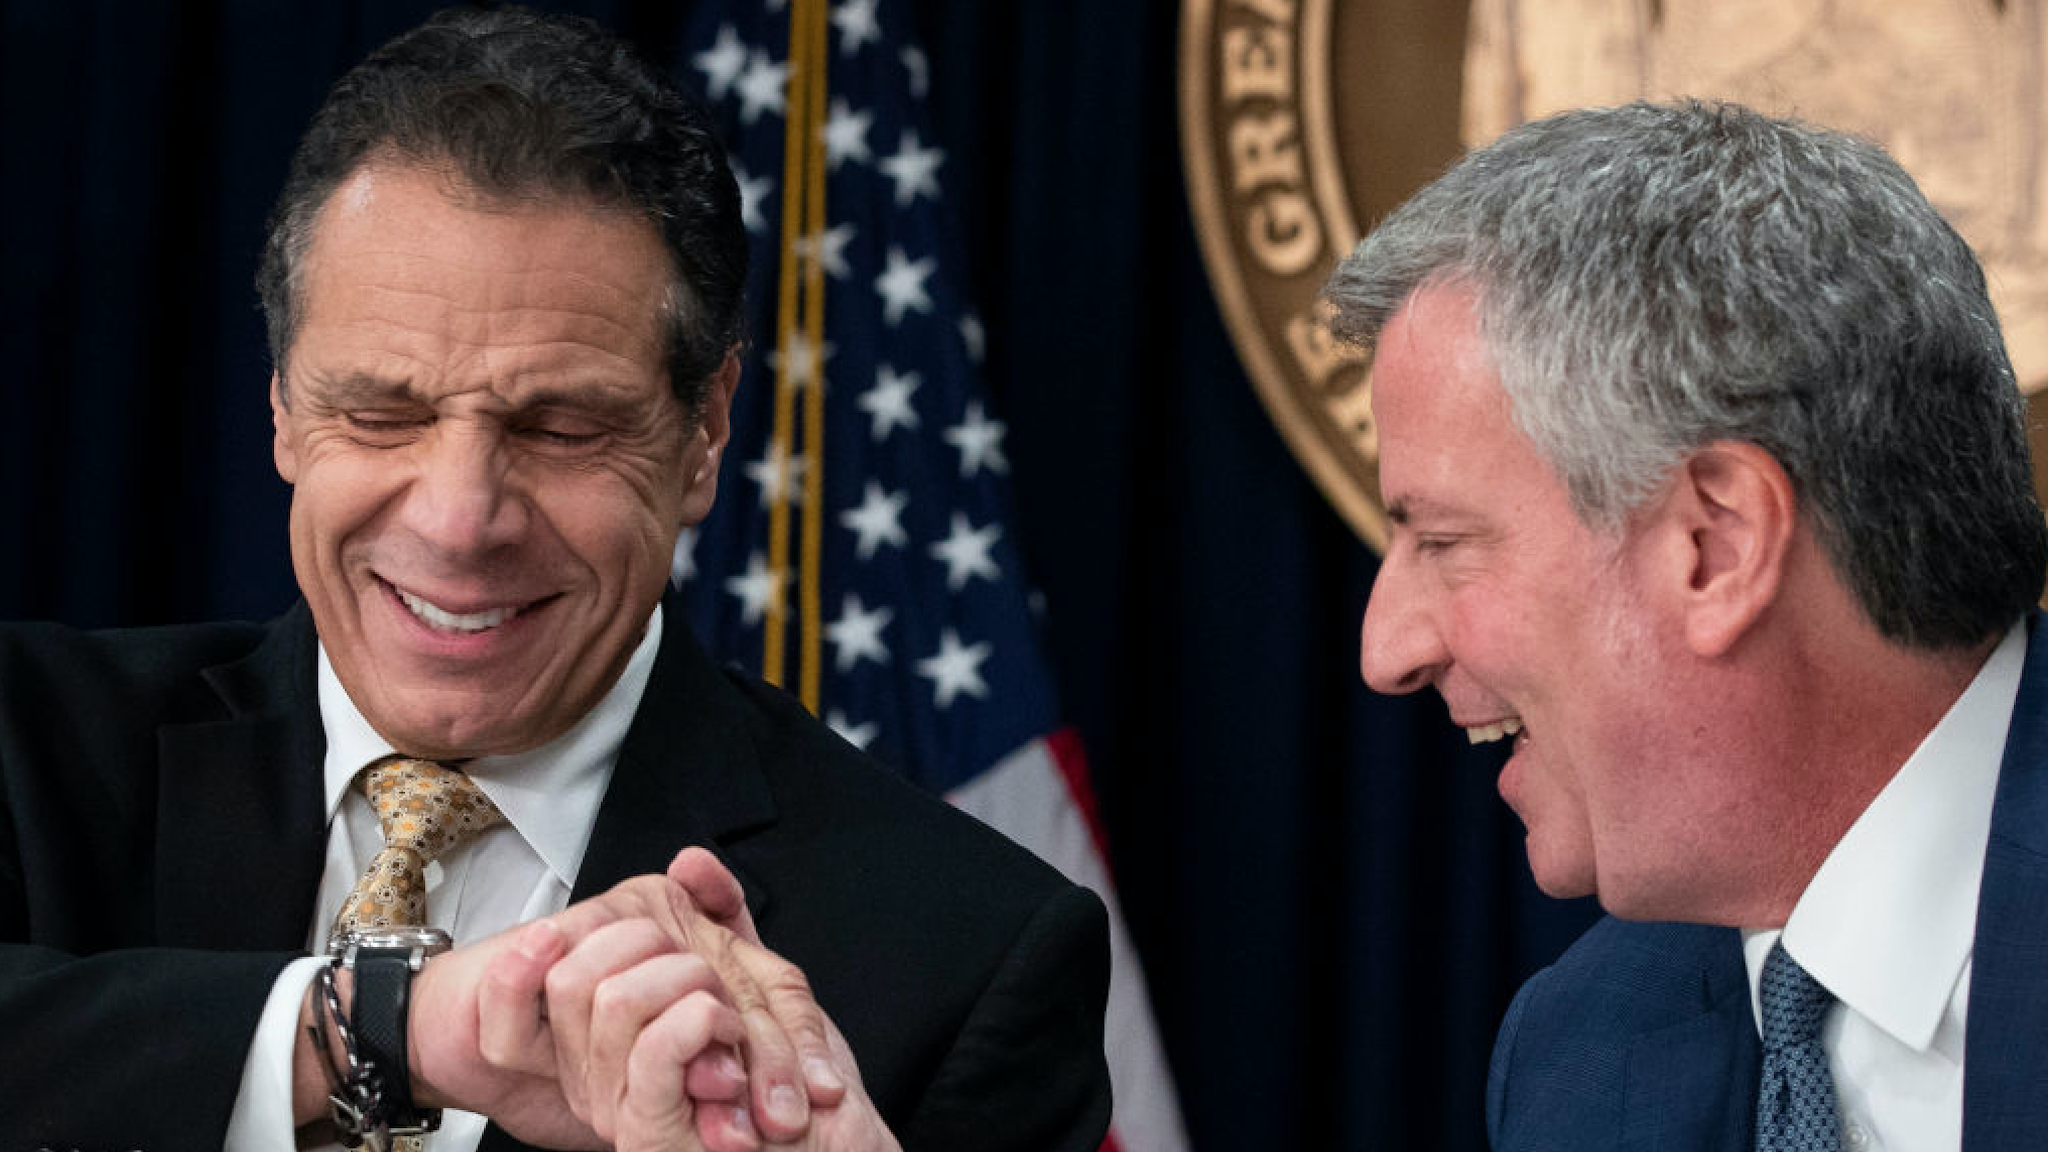 New York Governor Andrew Cuomo and New York City Mayor Bill de Blasio shake hands during a press conference to discuss Amazon's decision to bring a new corporate location to New York City, November 13, 2018 in New York City.